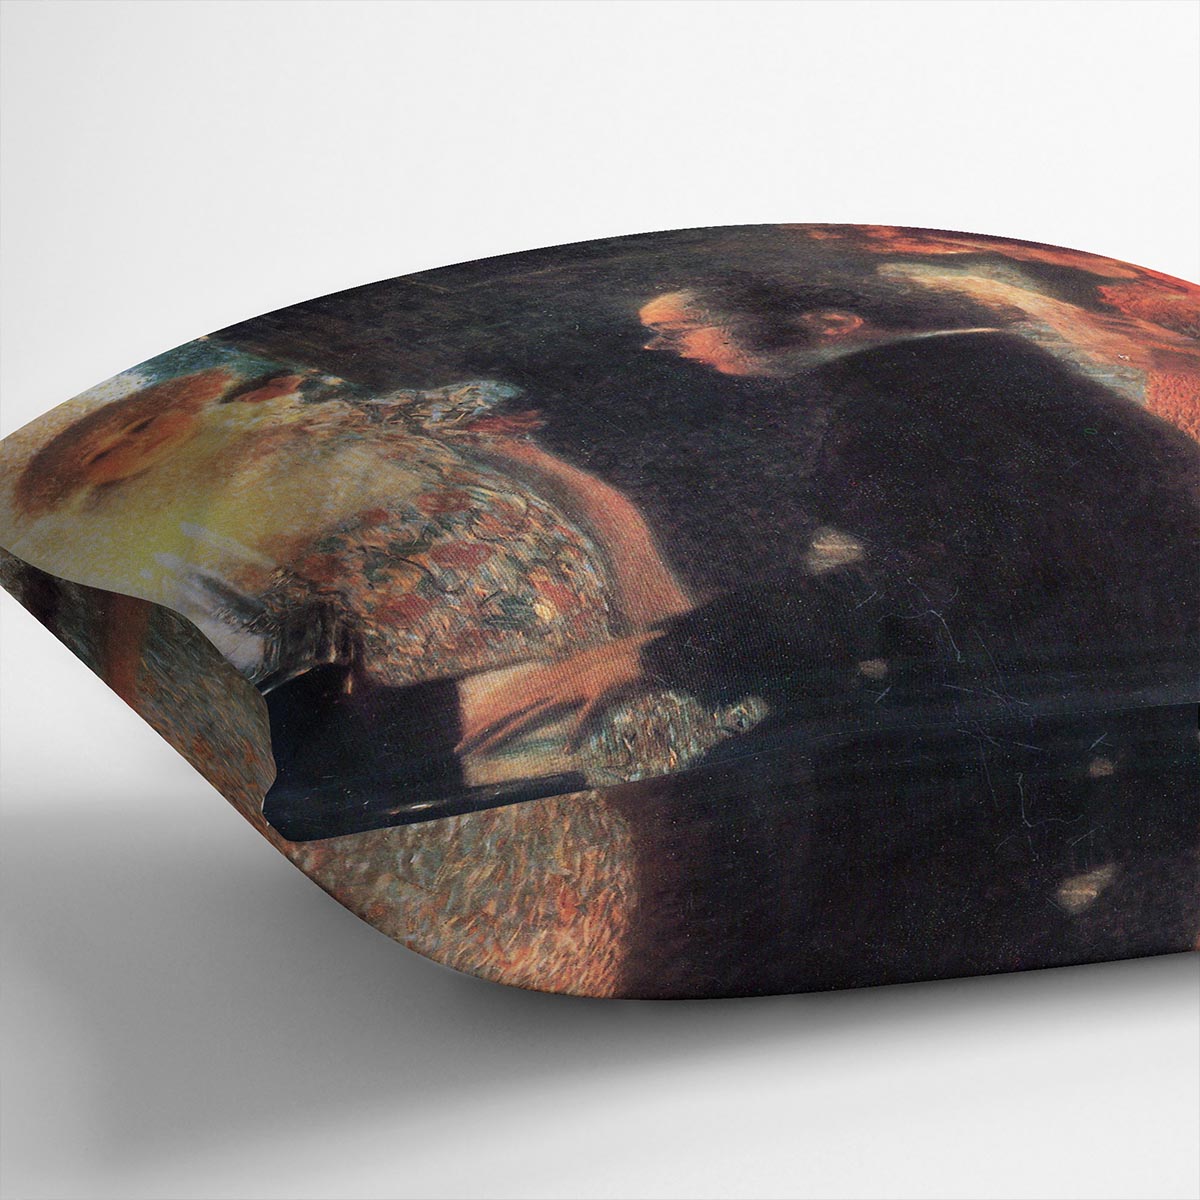 Schubert at the piano by Klimt Cushion